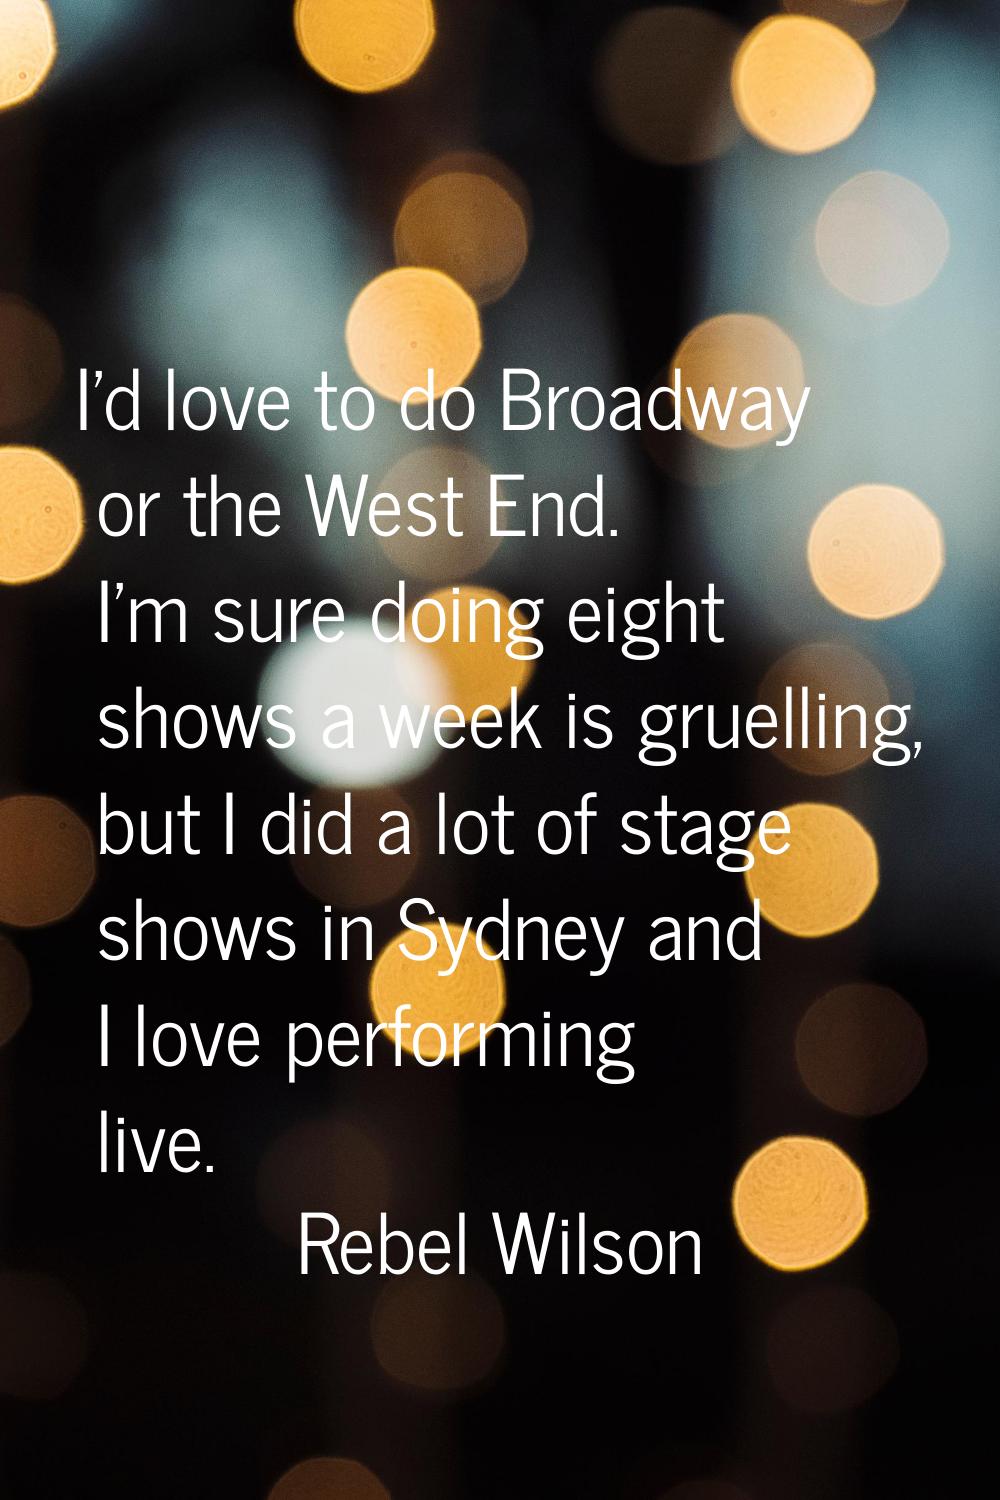 I'd love to do Broadway or the West End. I'm sure doing eight shows a week is gruelling, but I did 